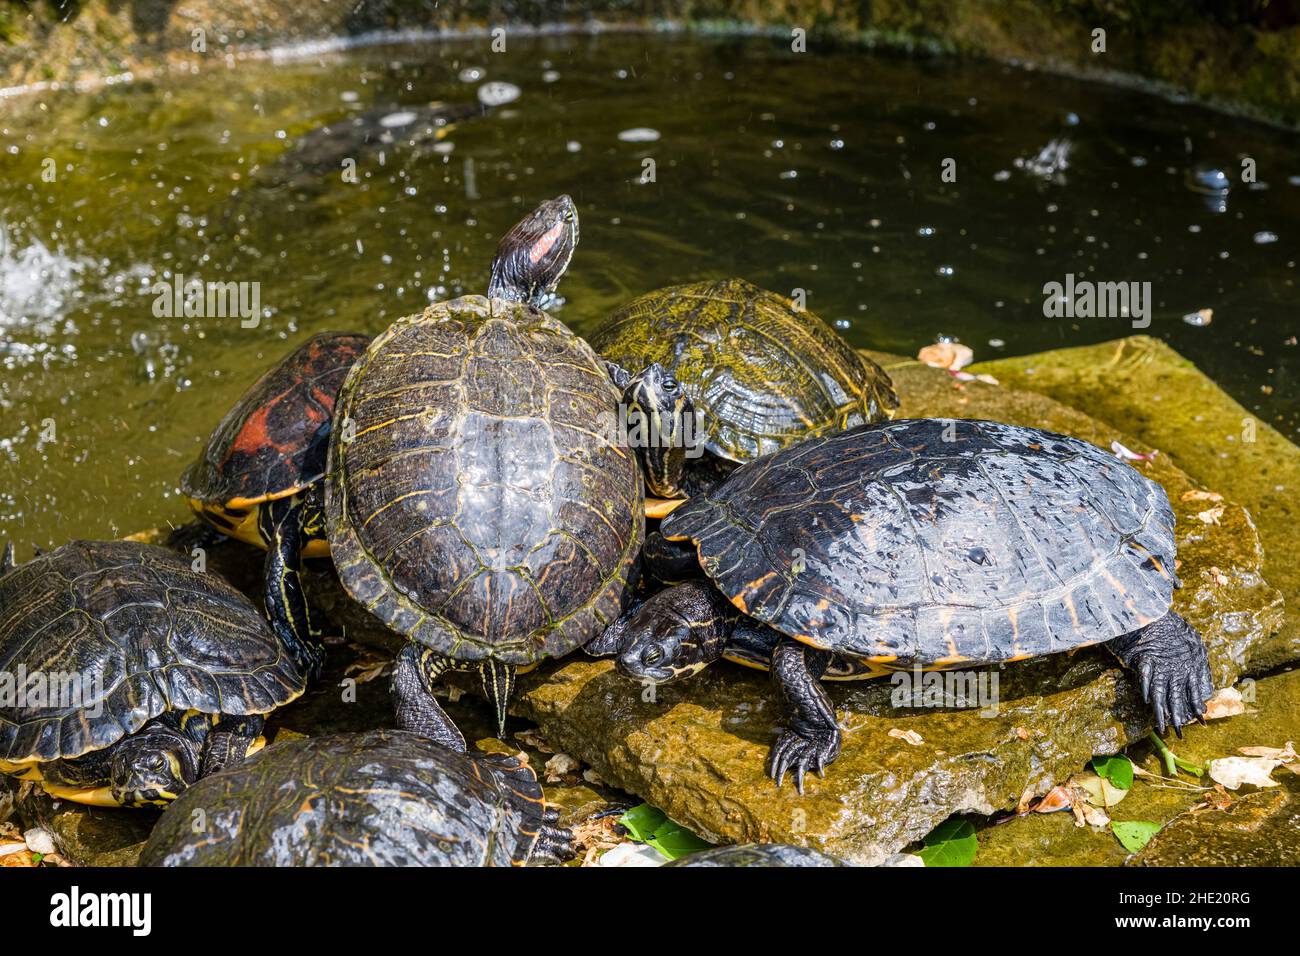 Turtels sunbathing at a fountain in the garden of Villa Carlotta, located at the lakeside of Lake Como. Stock Photo